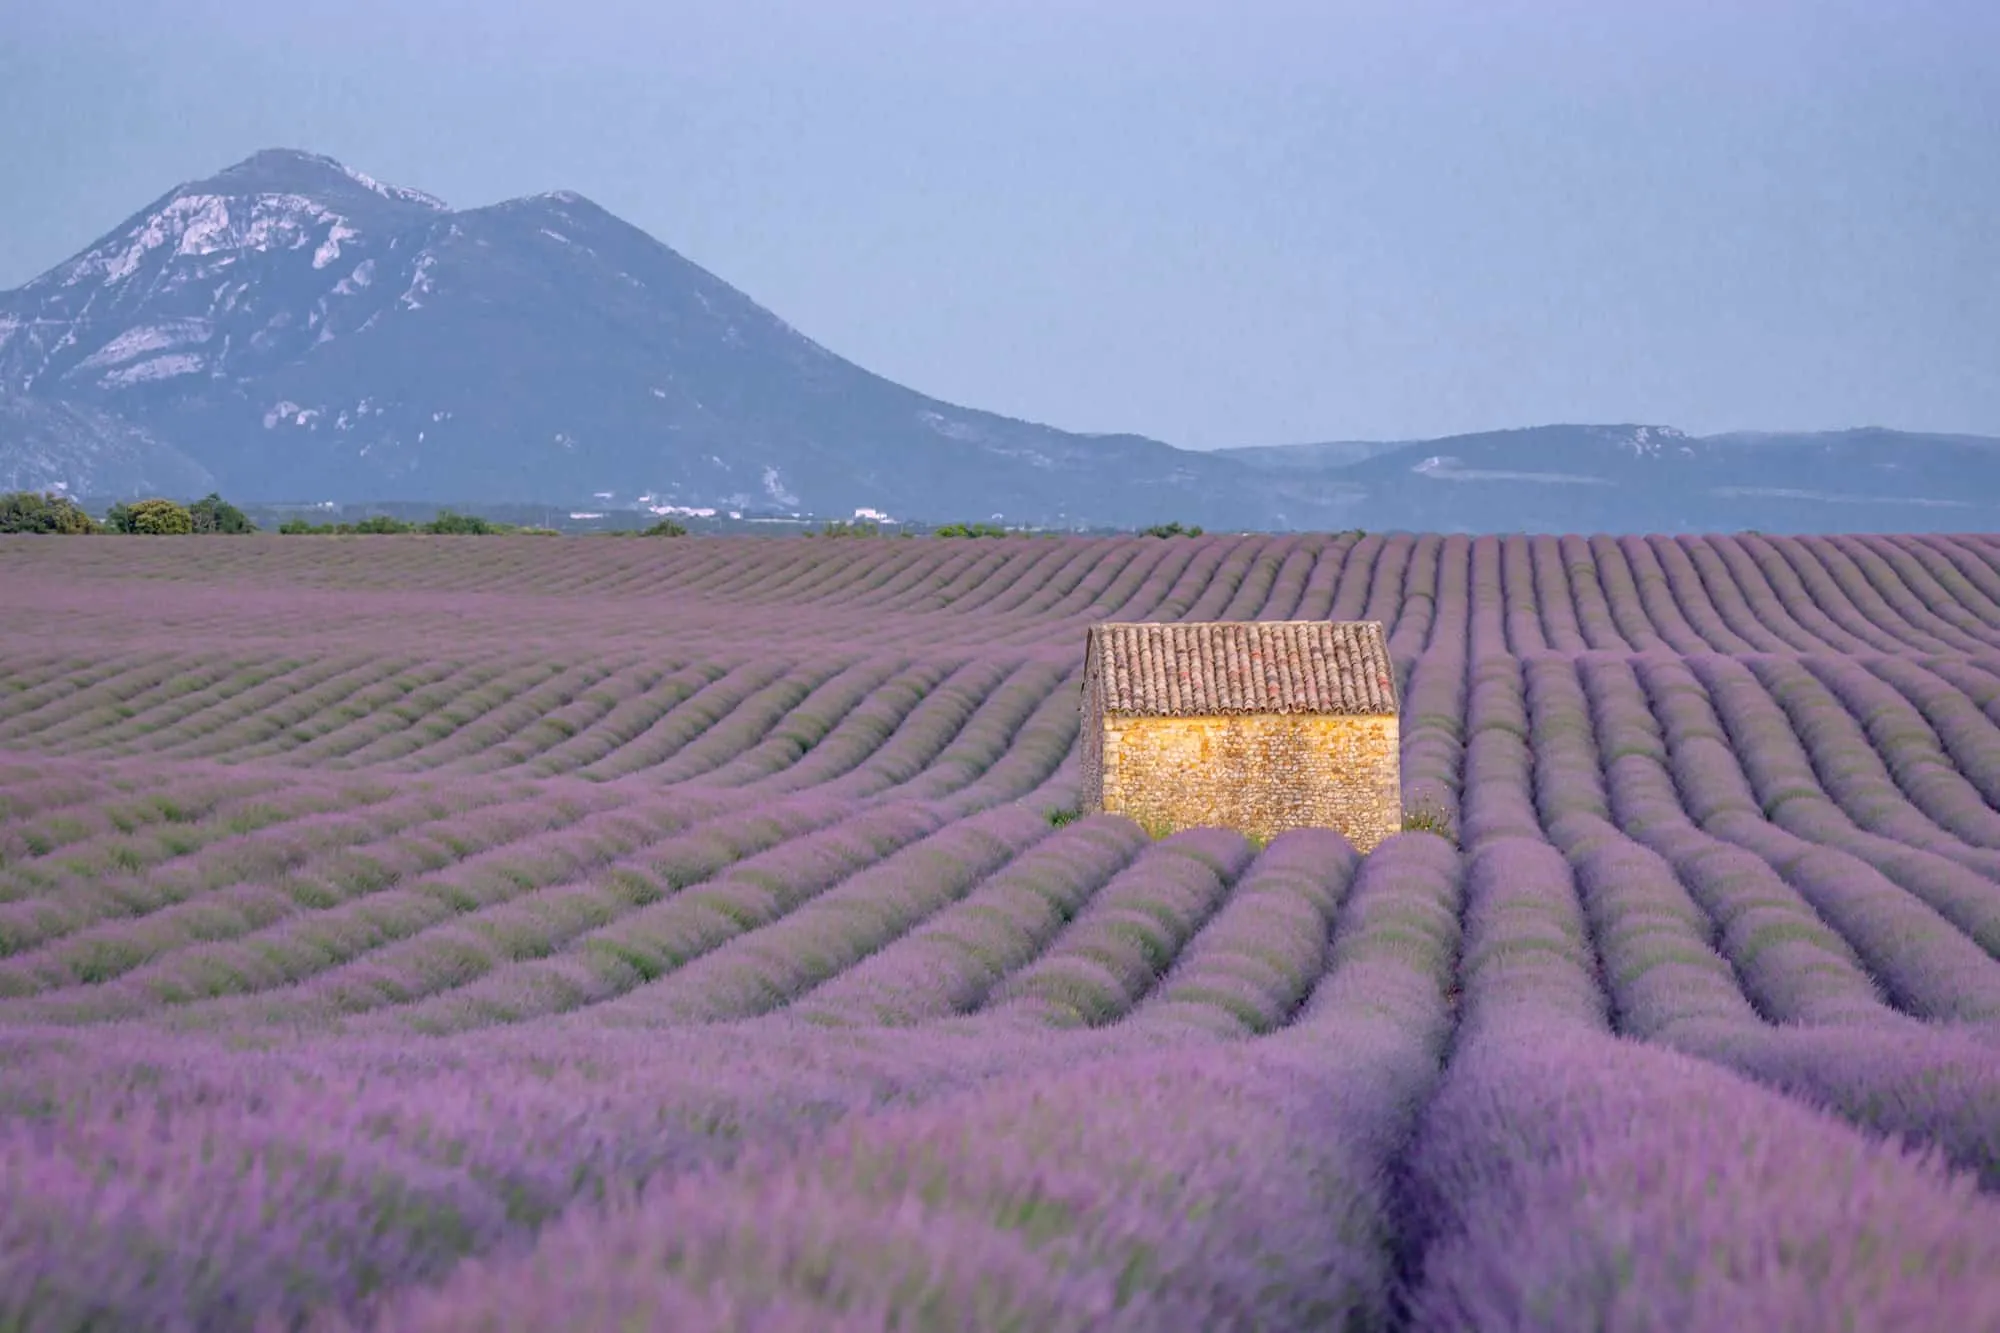 Lavender fields on the Plateau de Valensole in Provence, France